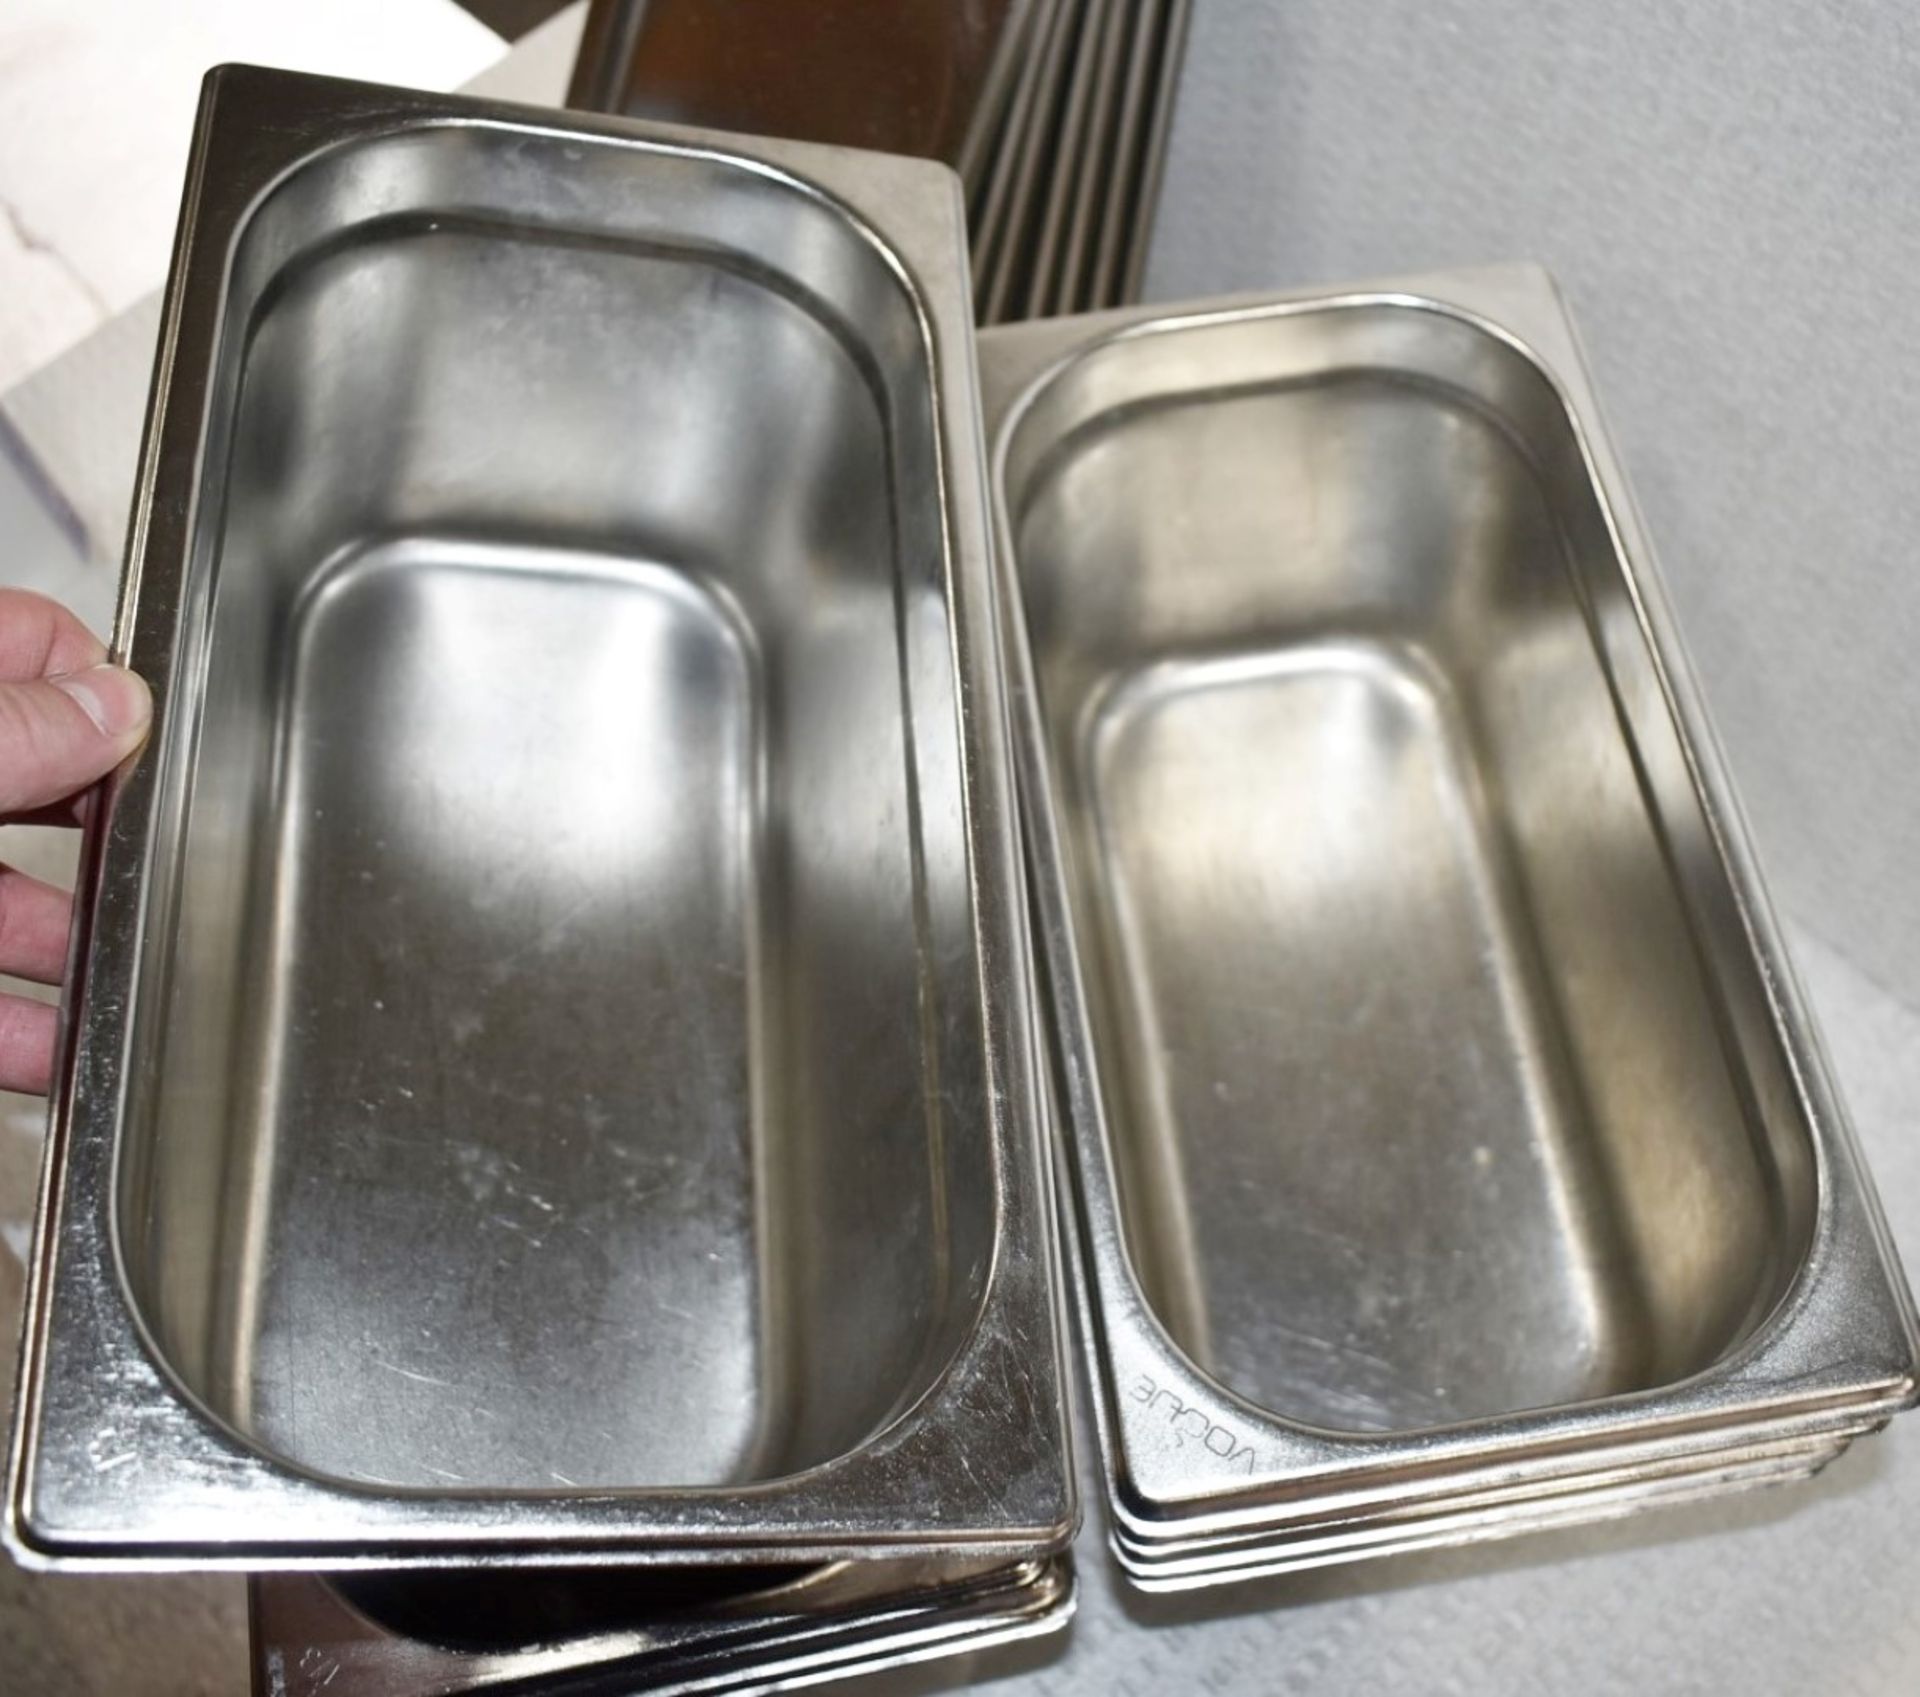 8 x Vogue Stainless Steel 1/3 Gastronorm Pans With Lids - Size: H15 x W17.5 x L32 cms - Image 3 of 5